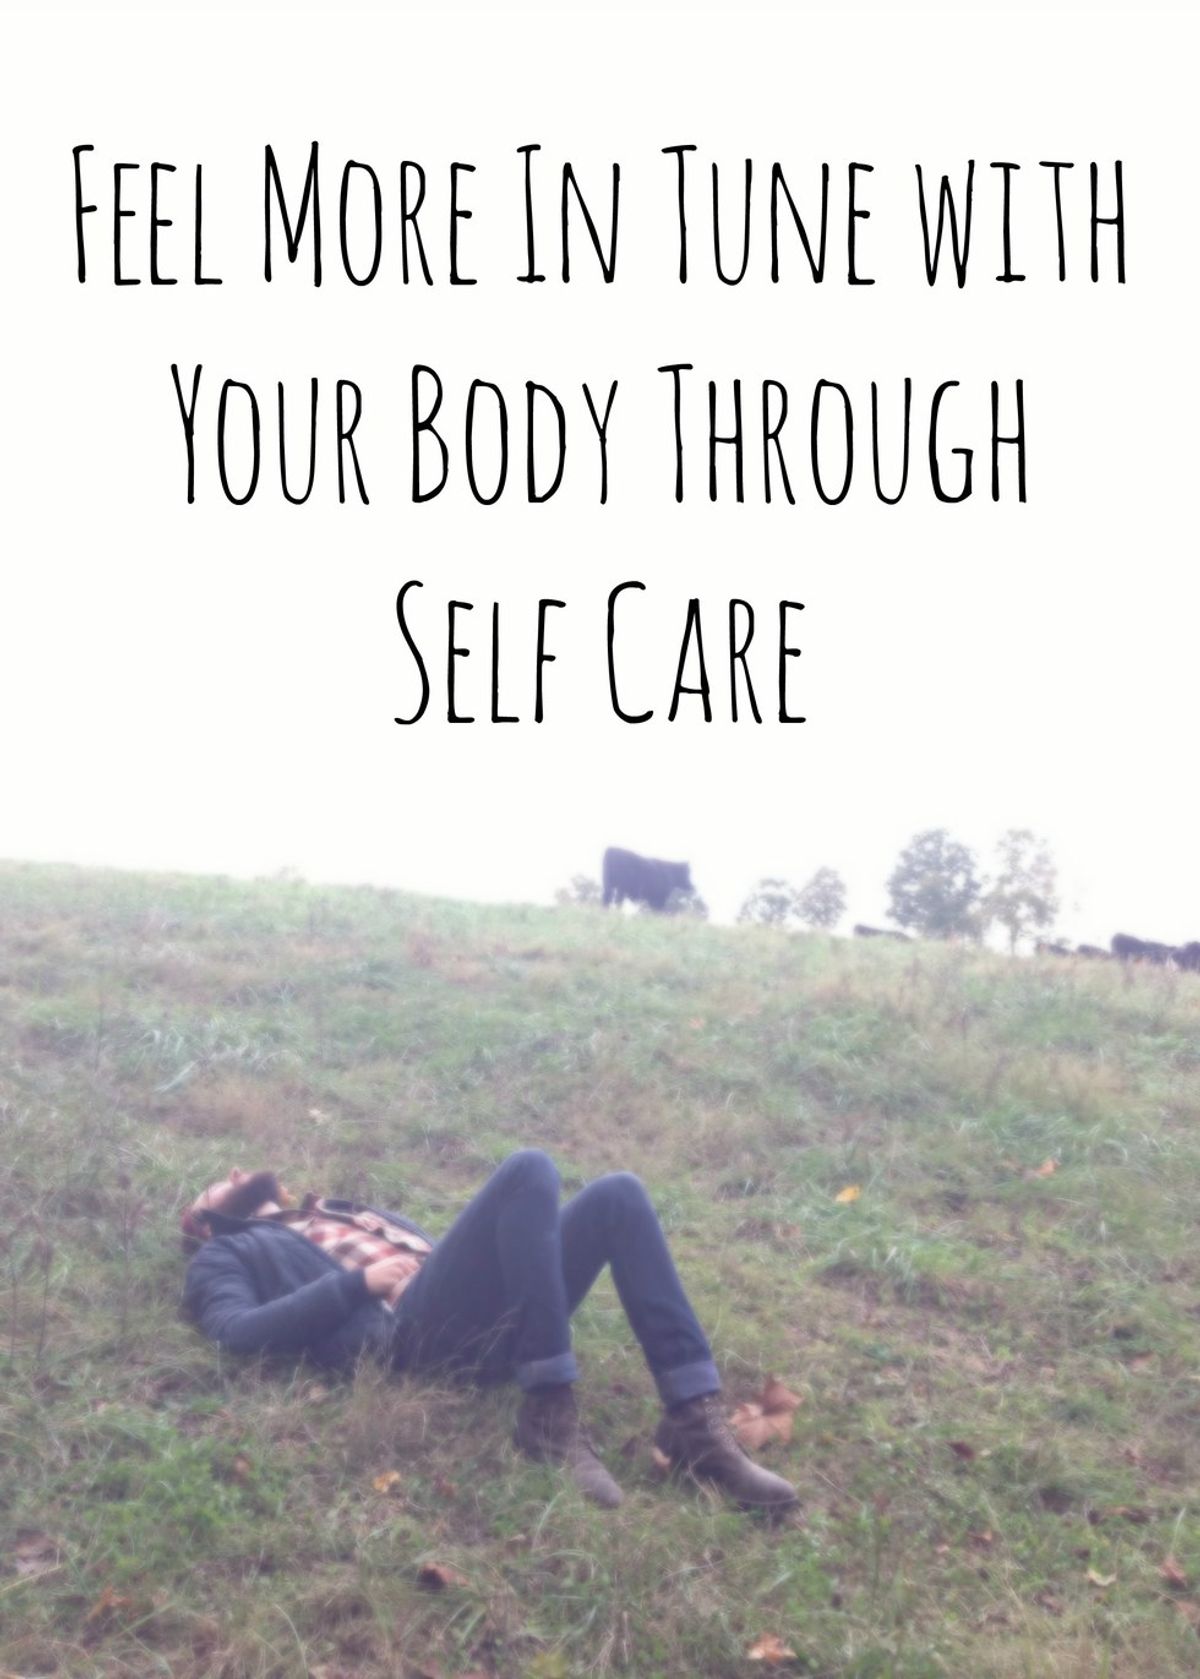 A Guide To Self-Care